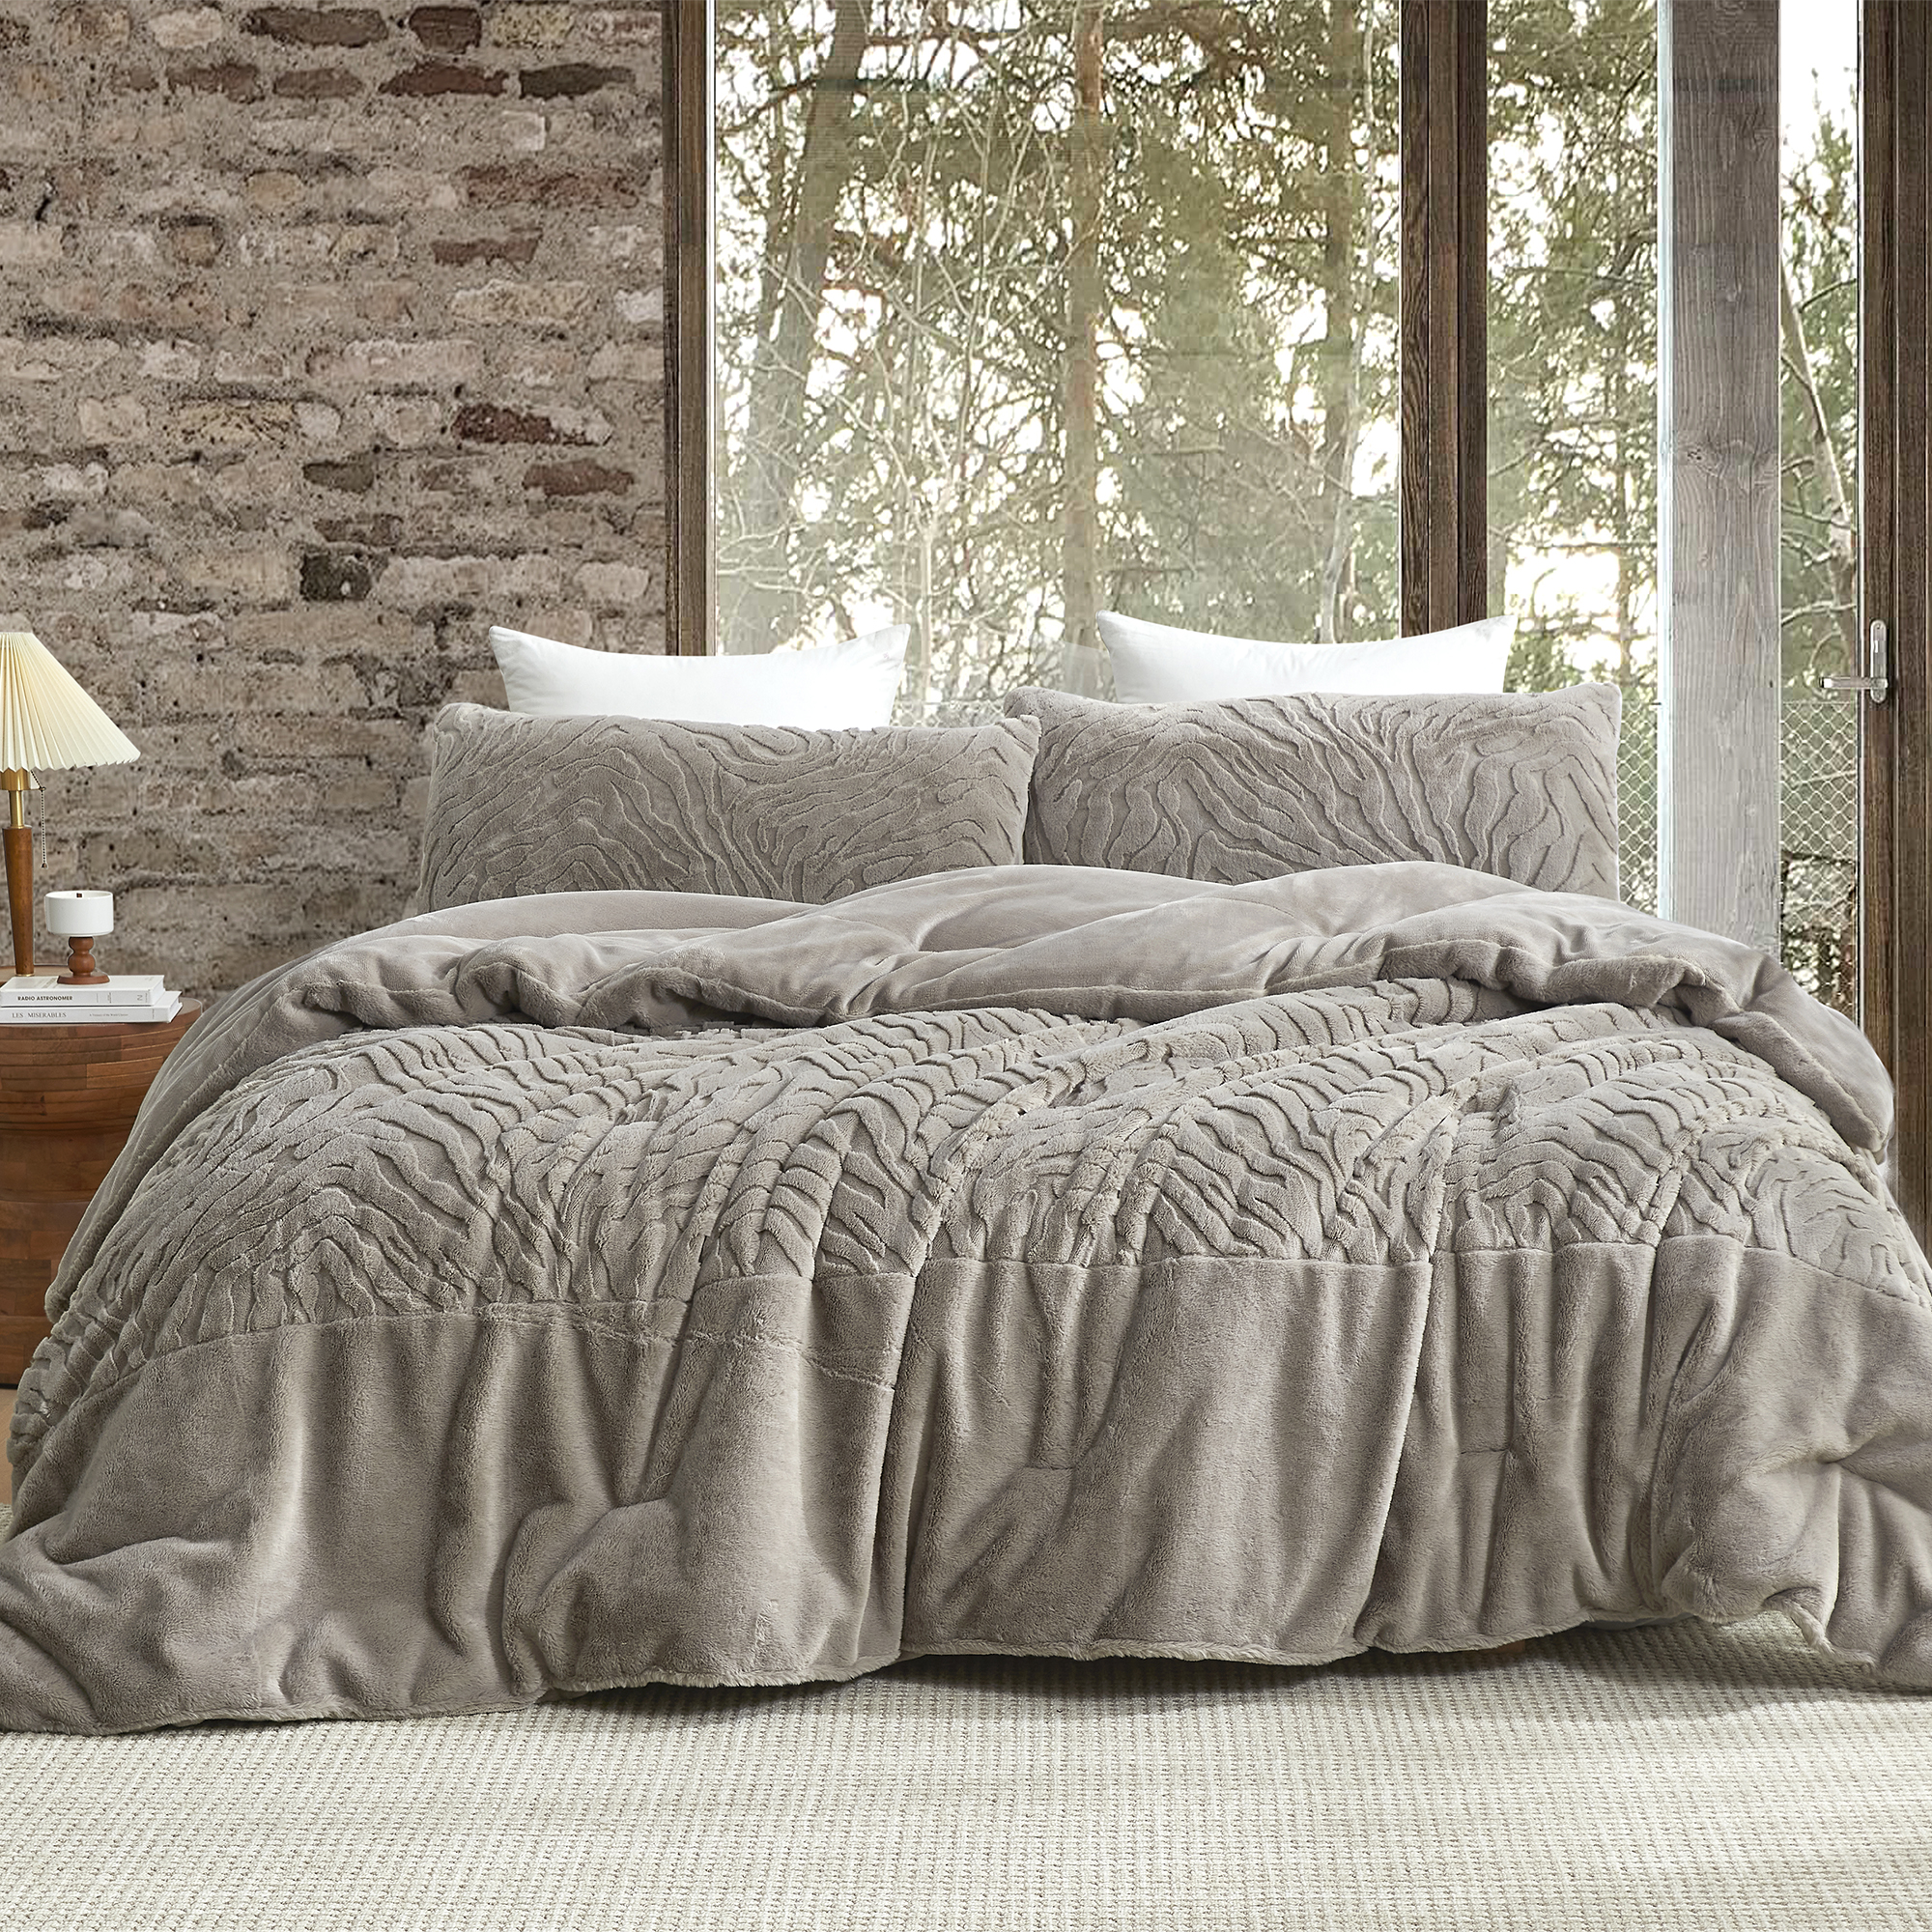 Faded Zebra - Coma Inducer® Oversized King Comforter - Pepper Taupe Gray